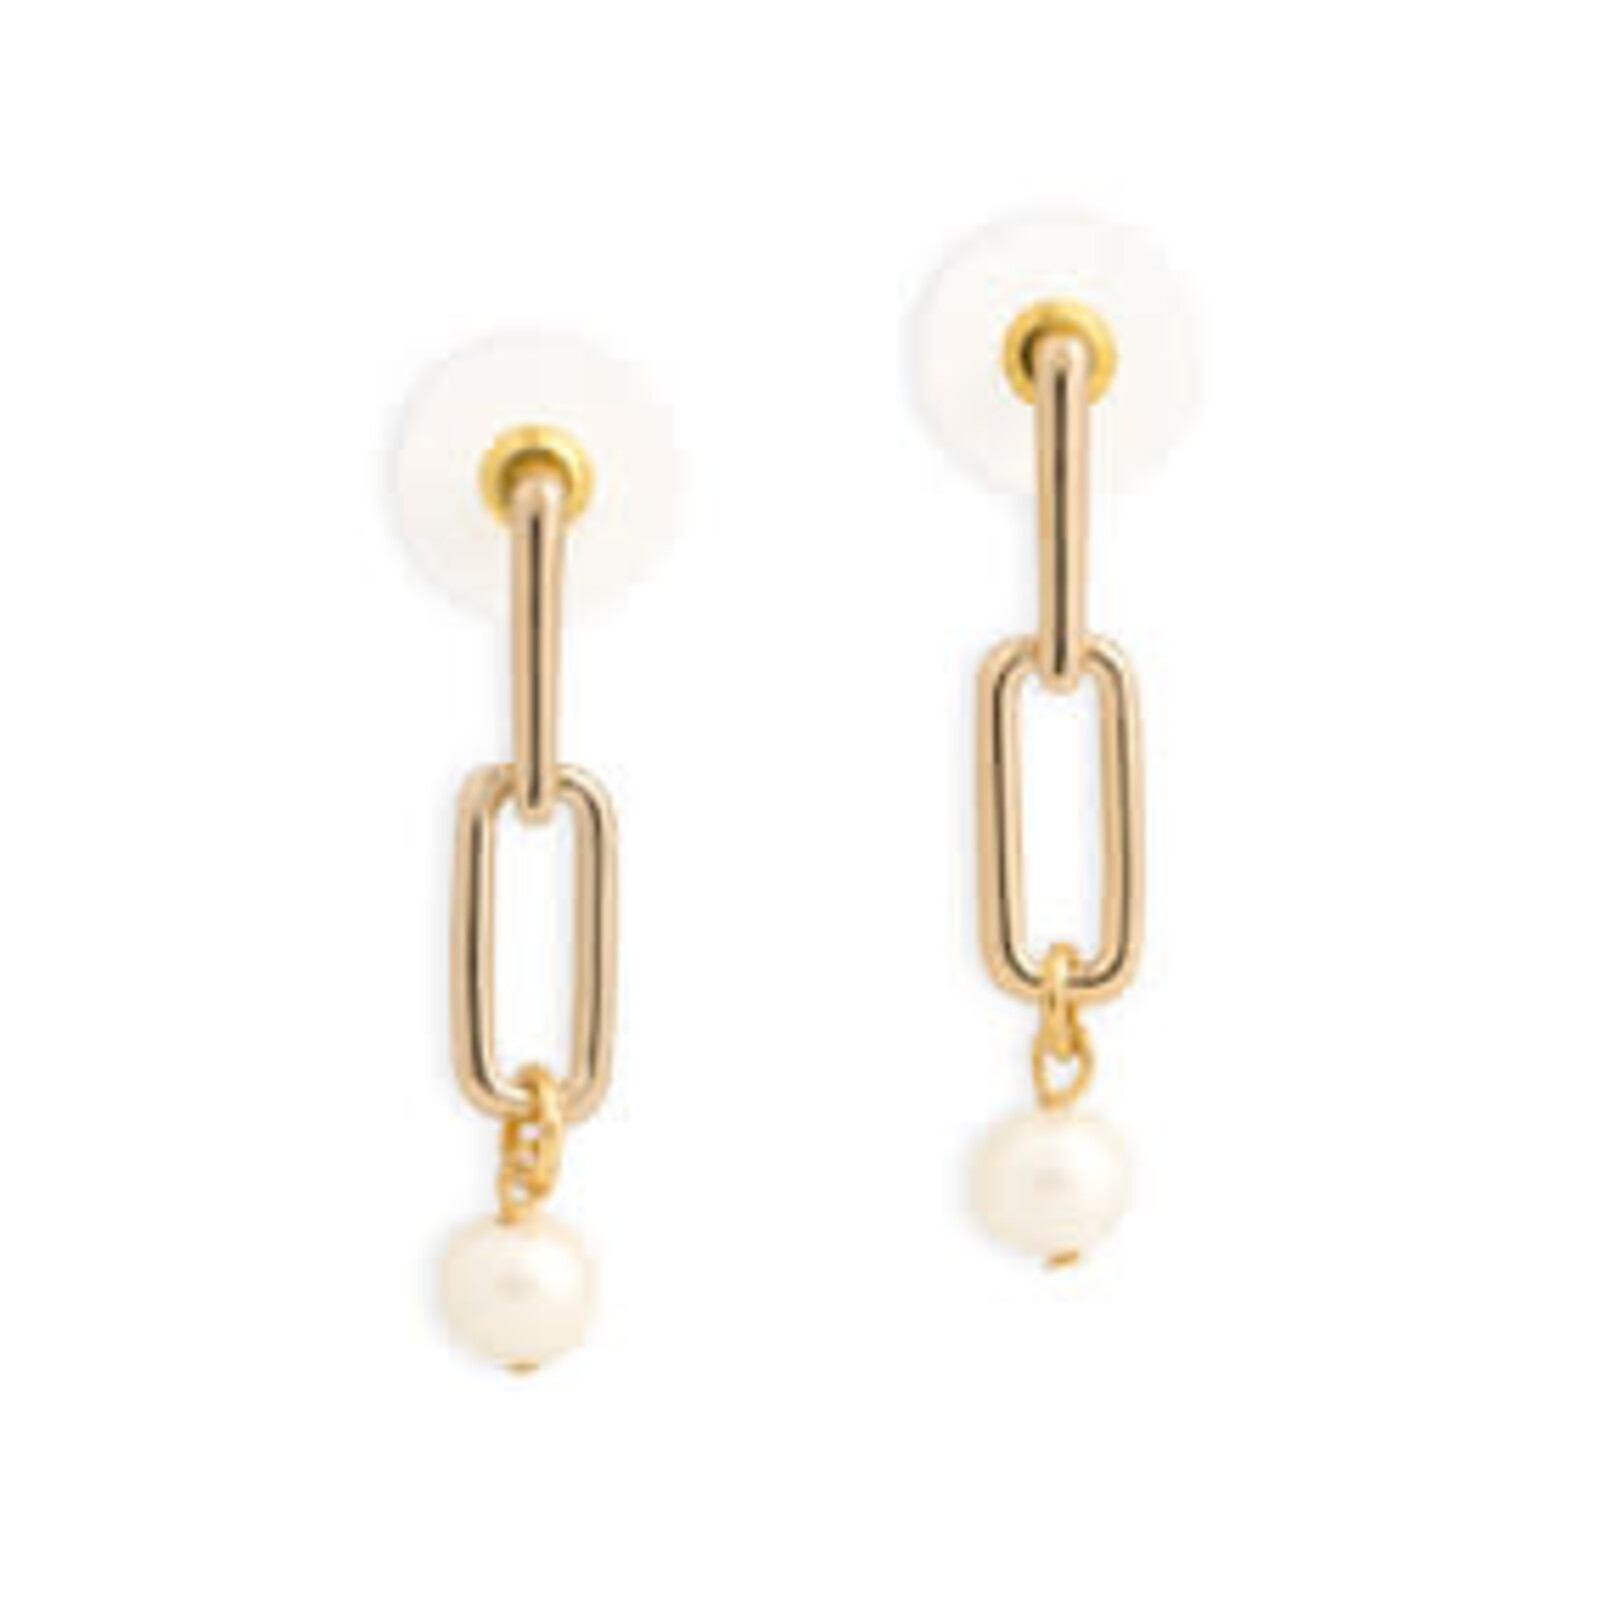 Demdaco Pearls From Within Earrings - Gold    1004130358 loading=